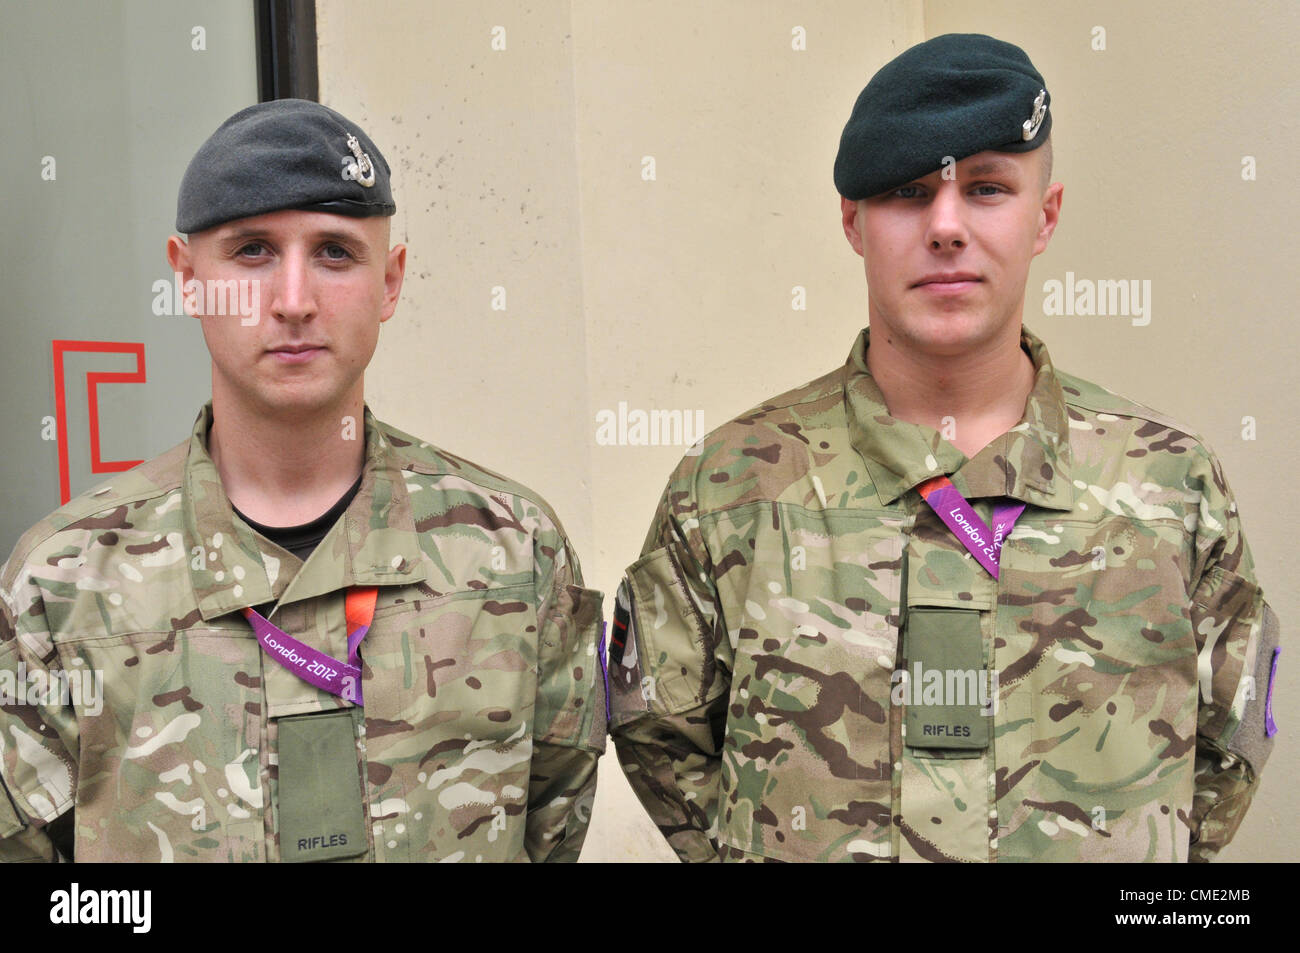 London, UK. 27th July 2012. Two soldiers pose for a portrait as the military are apparent around central London, with soldiers taking part as extra security due to the poor performance of G4S the private security firm. Stock Photo